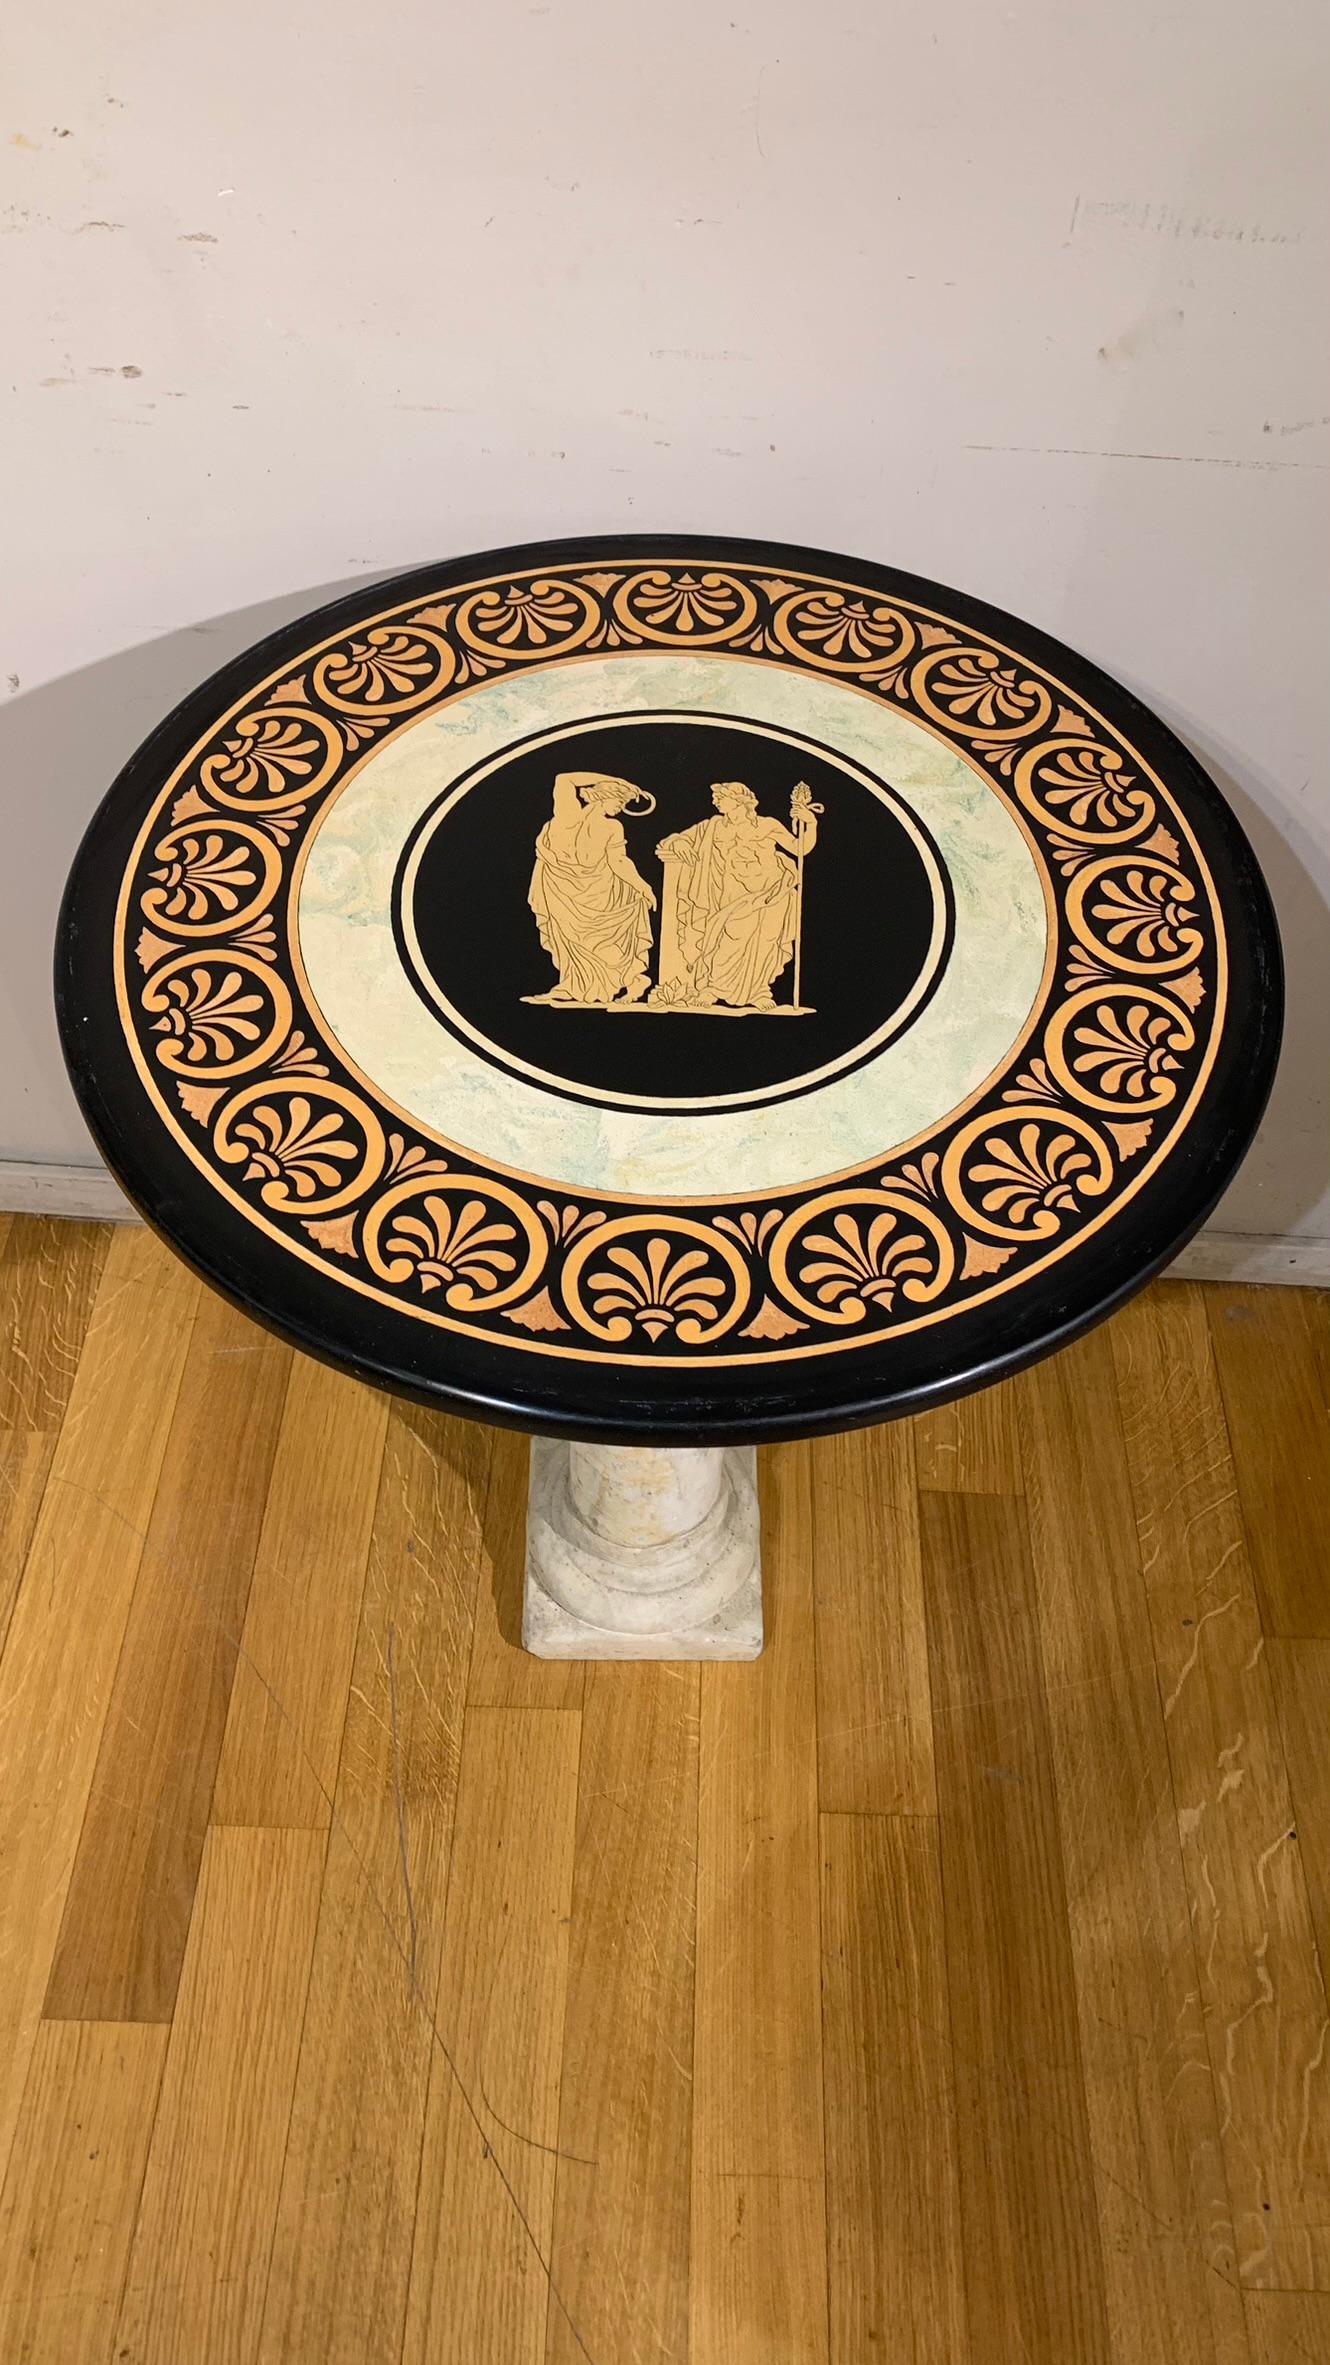 Late 19th Century Neoclassical Small Round Table in Carrara Marble and Scagliola In Good Condition For Sale In Firenze, FI